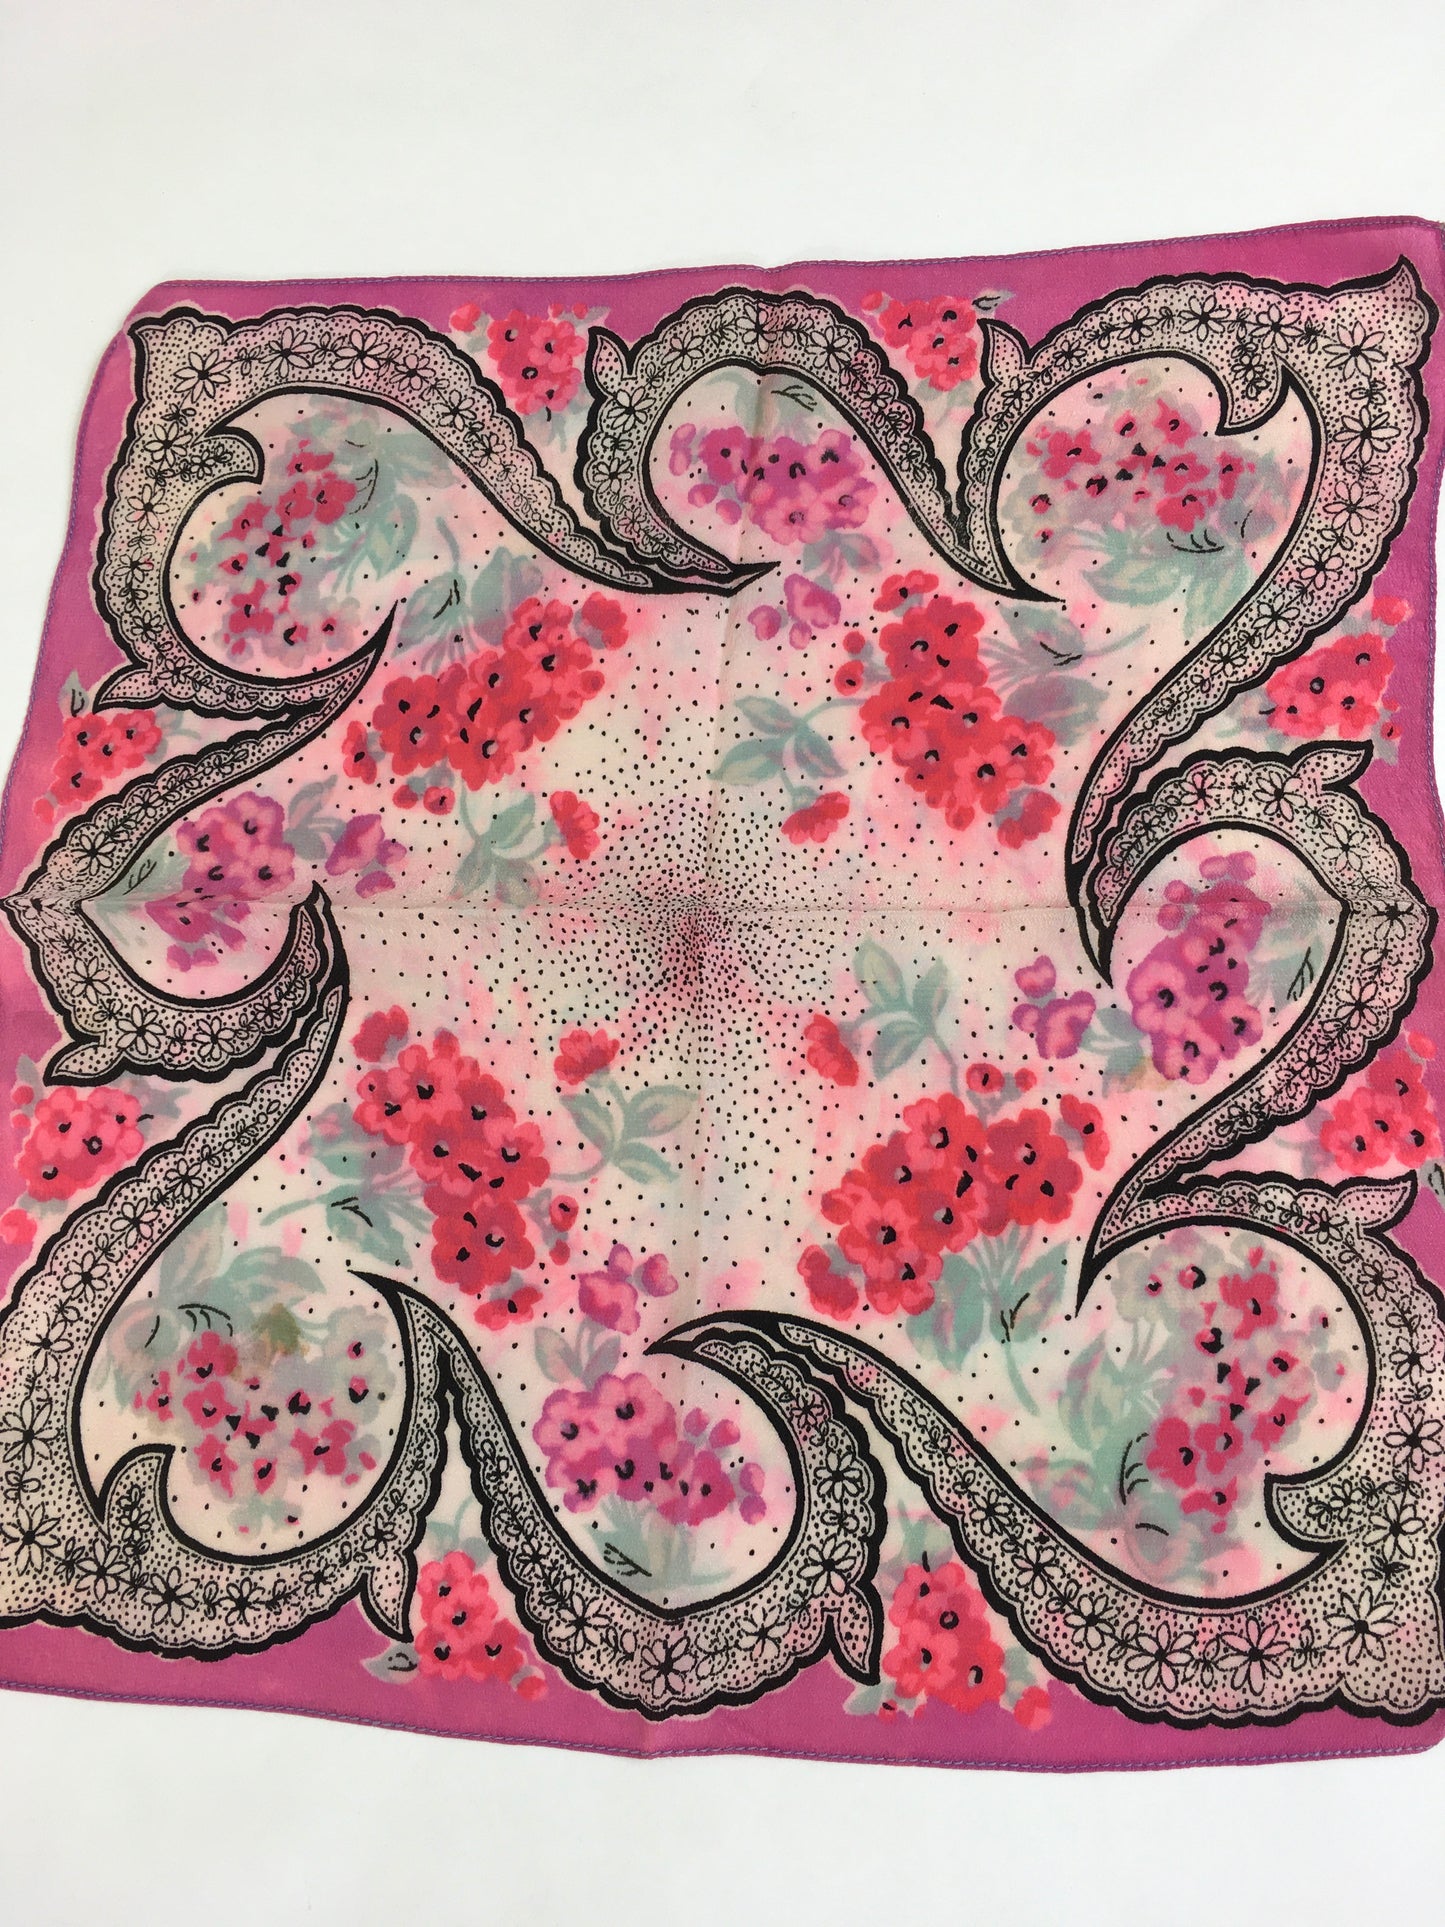 Original 1940’s Floral Rayon Crepe Hankie - In Cerise Pink and Stencilled Black